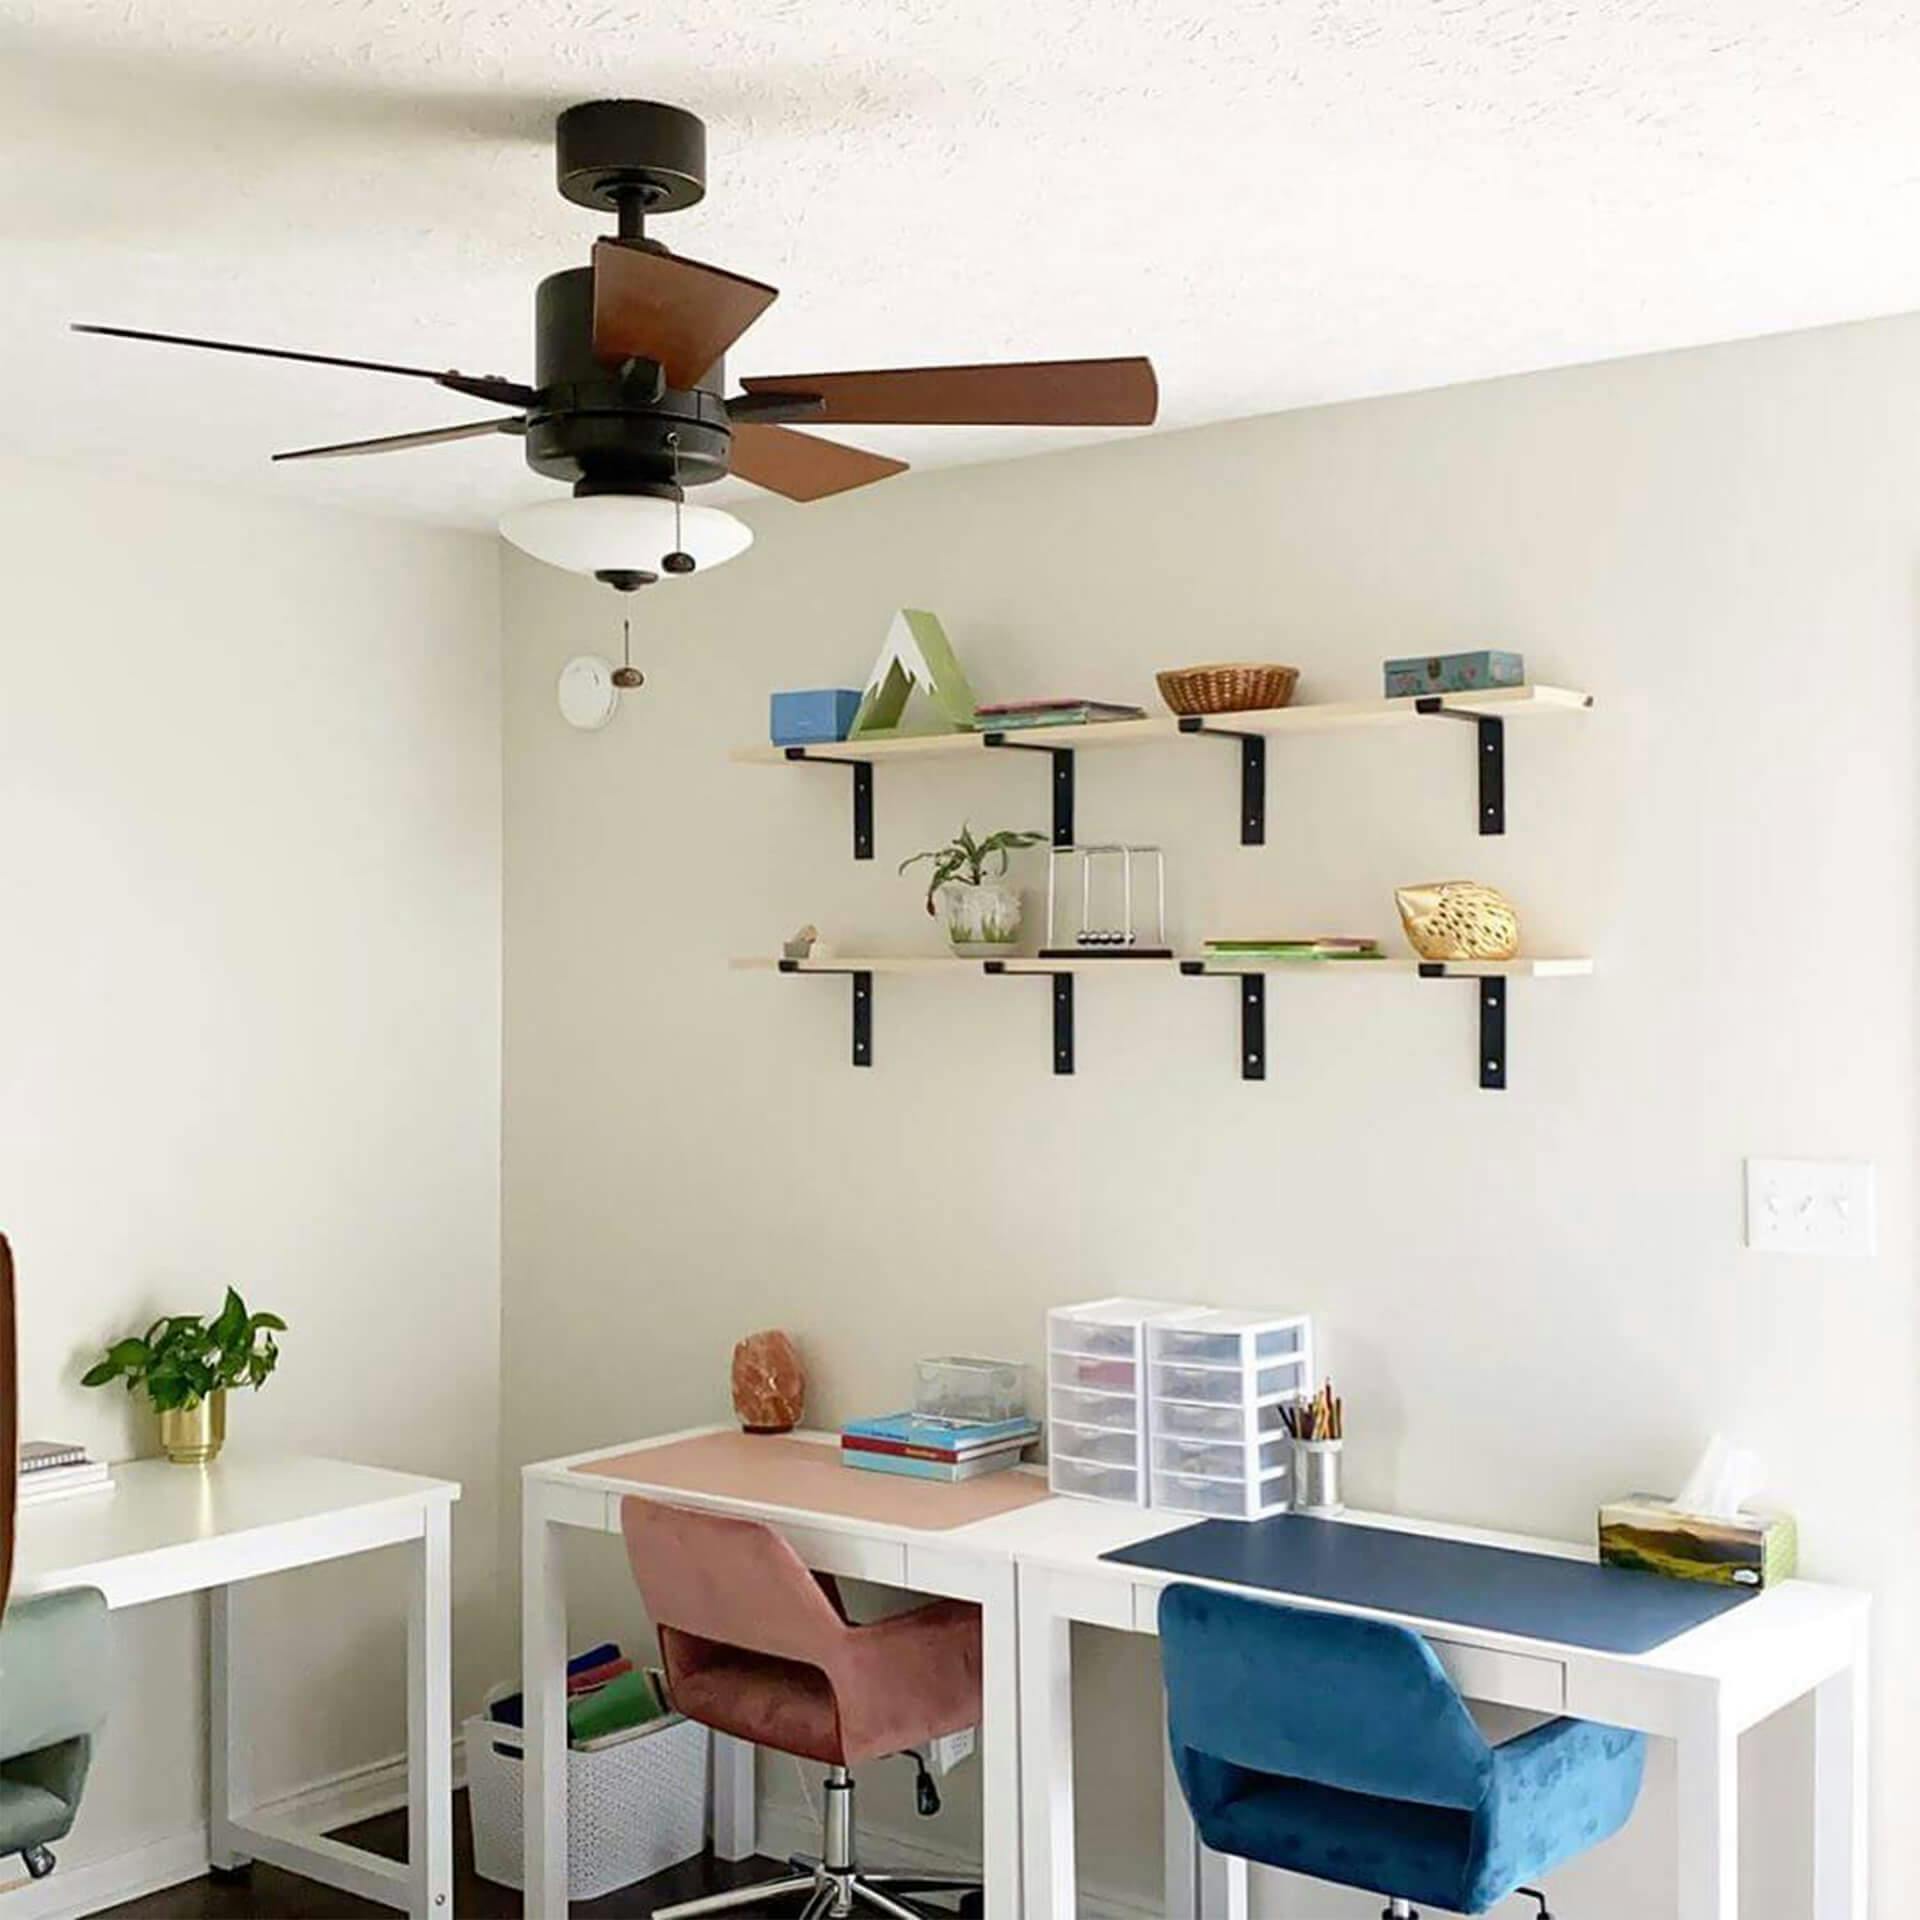 Home office featuring ceiling fan and 3 desks for kids